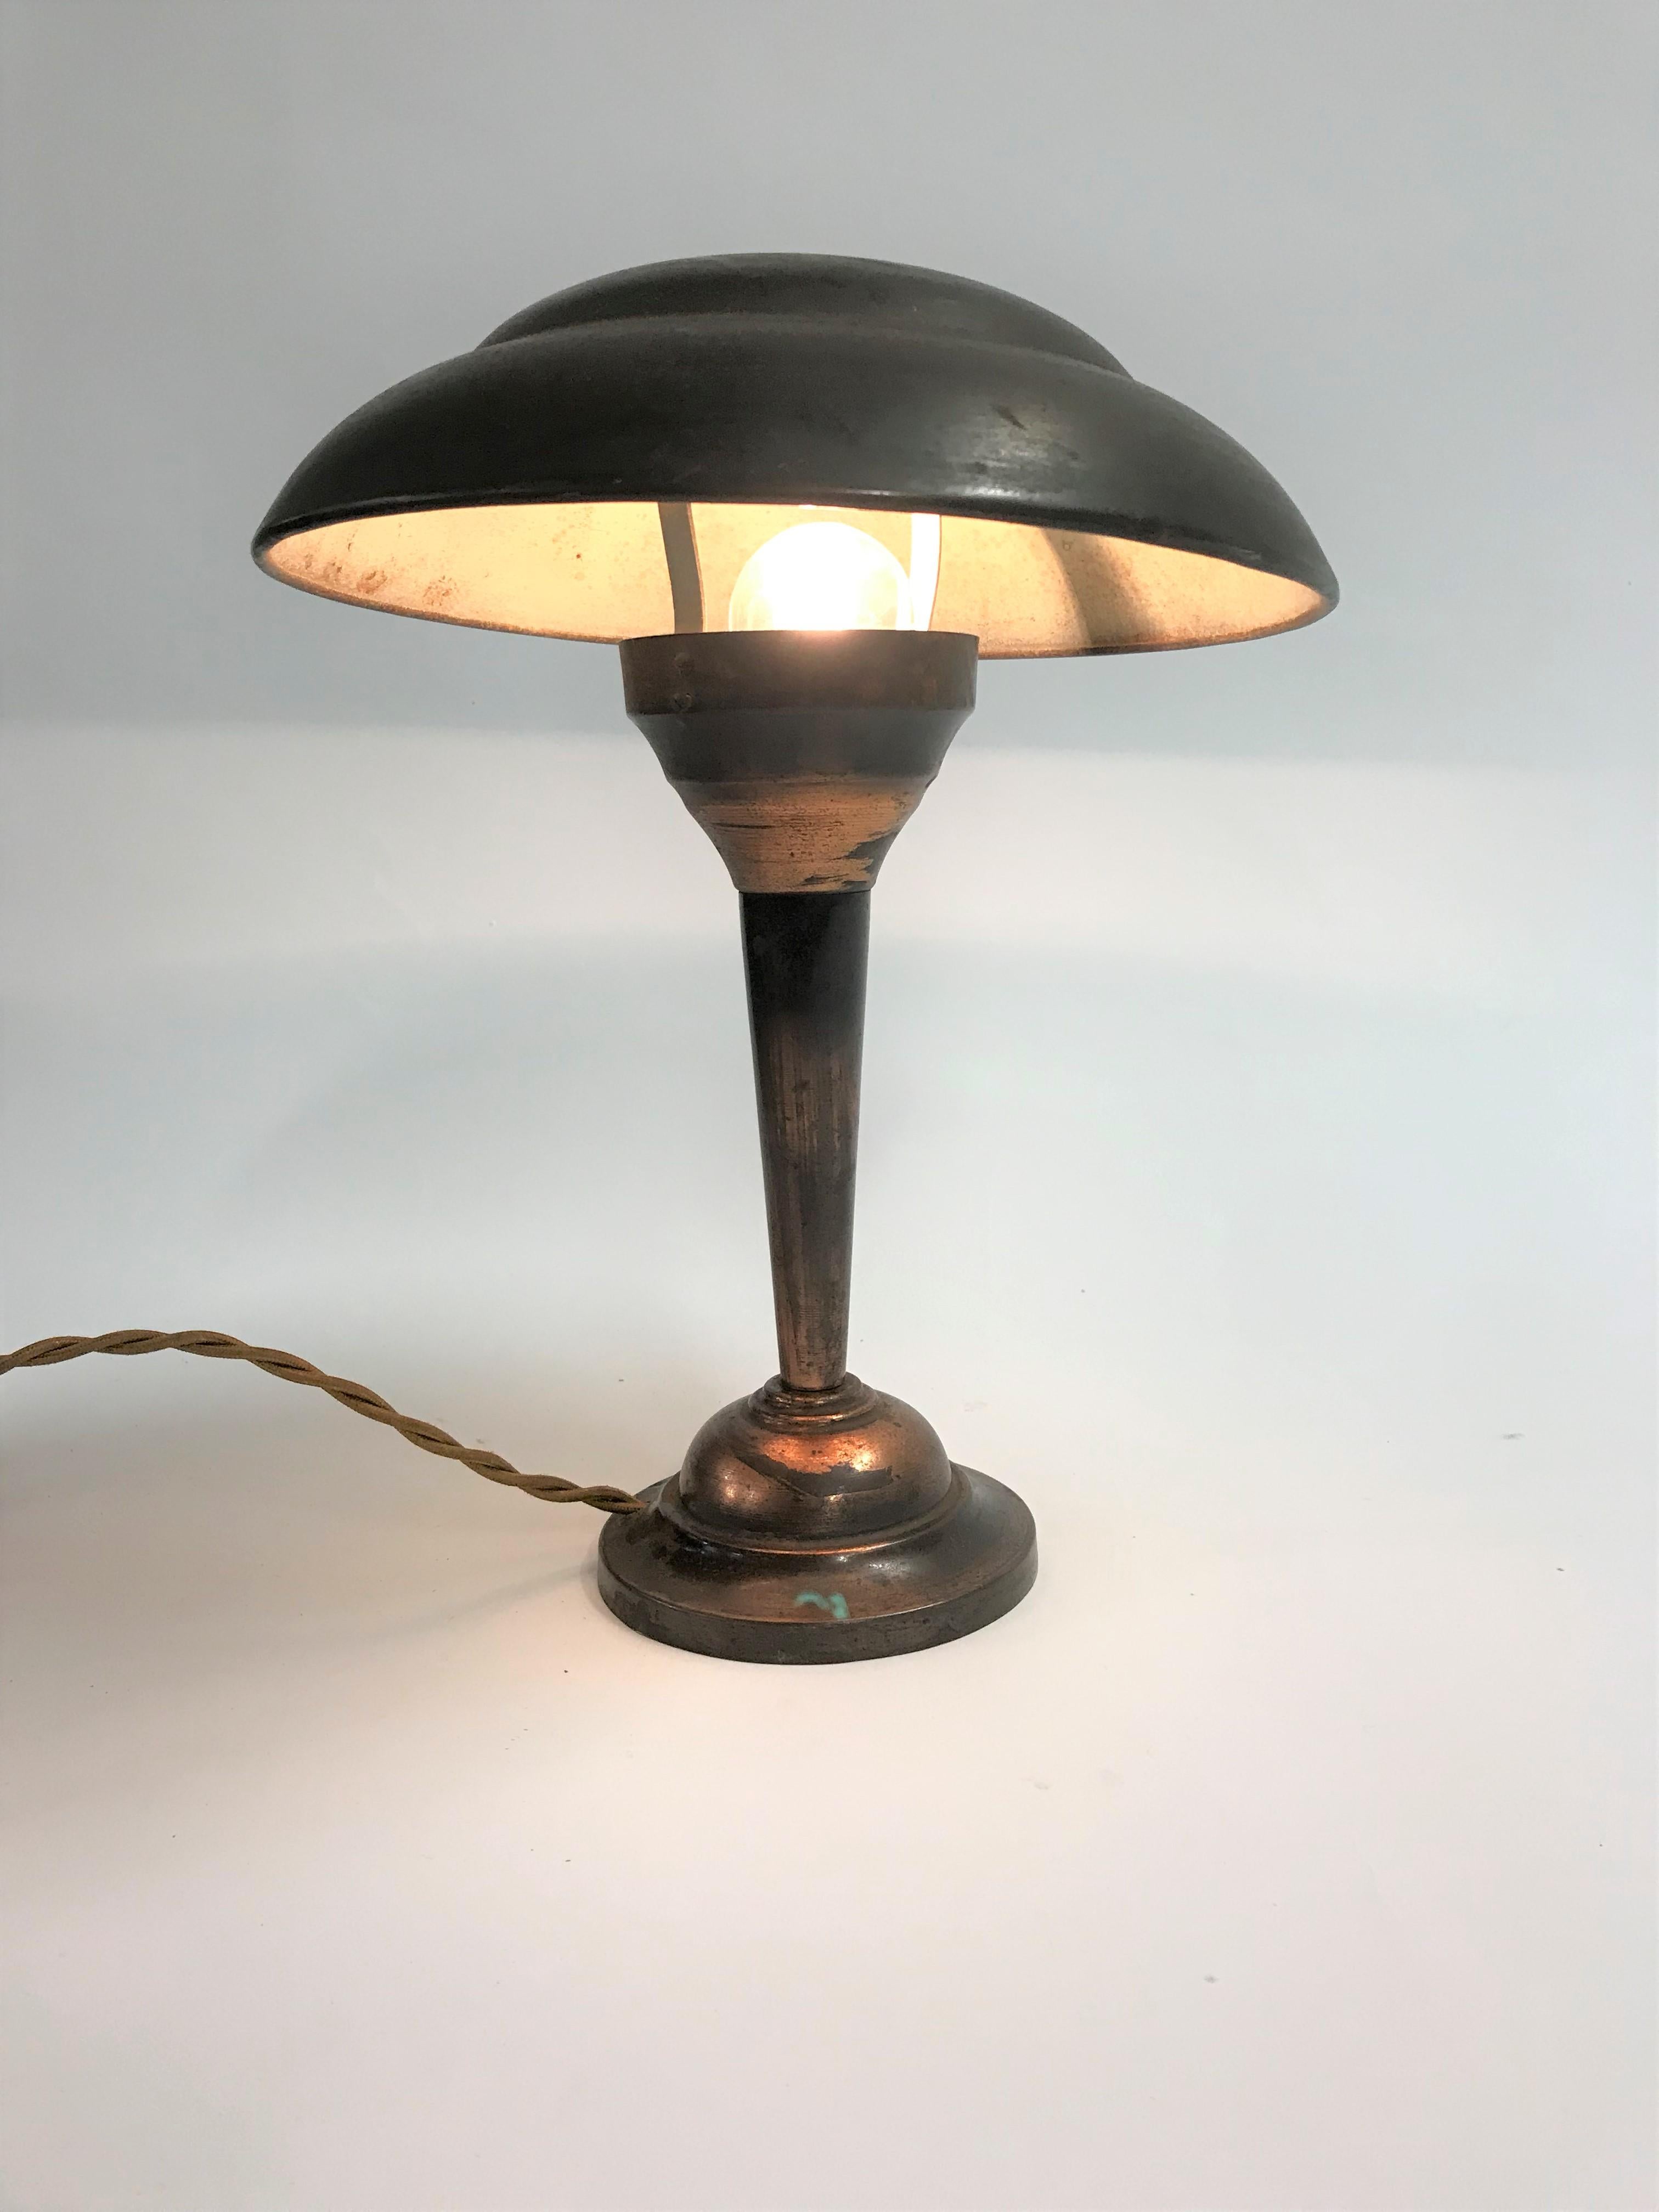 Beautiful original copper art deco table lamp.

These table lamps, sometimes referred to as 'mushroom' table lamps where produced in the 1930s.

The copper aged beautifully and is left untouched on purpose.

Rewired with braided wire to remain